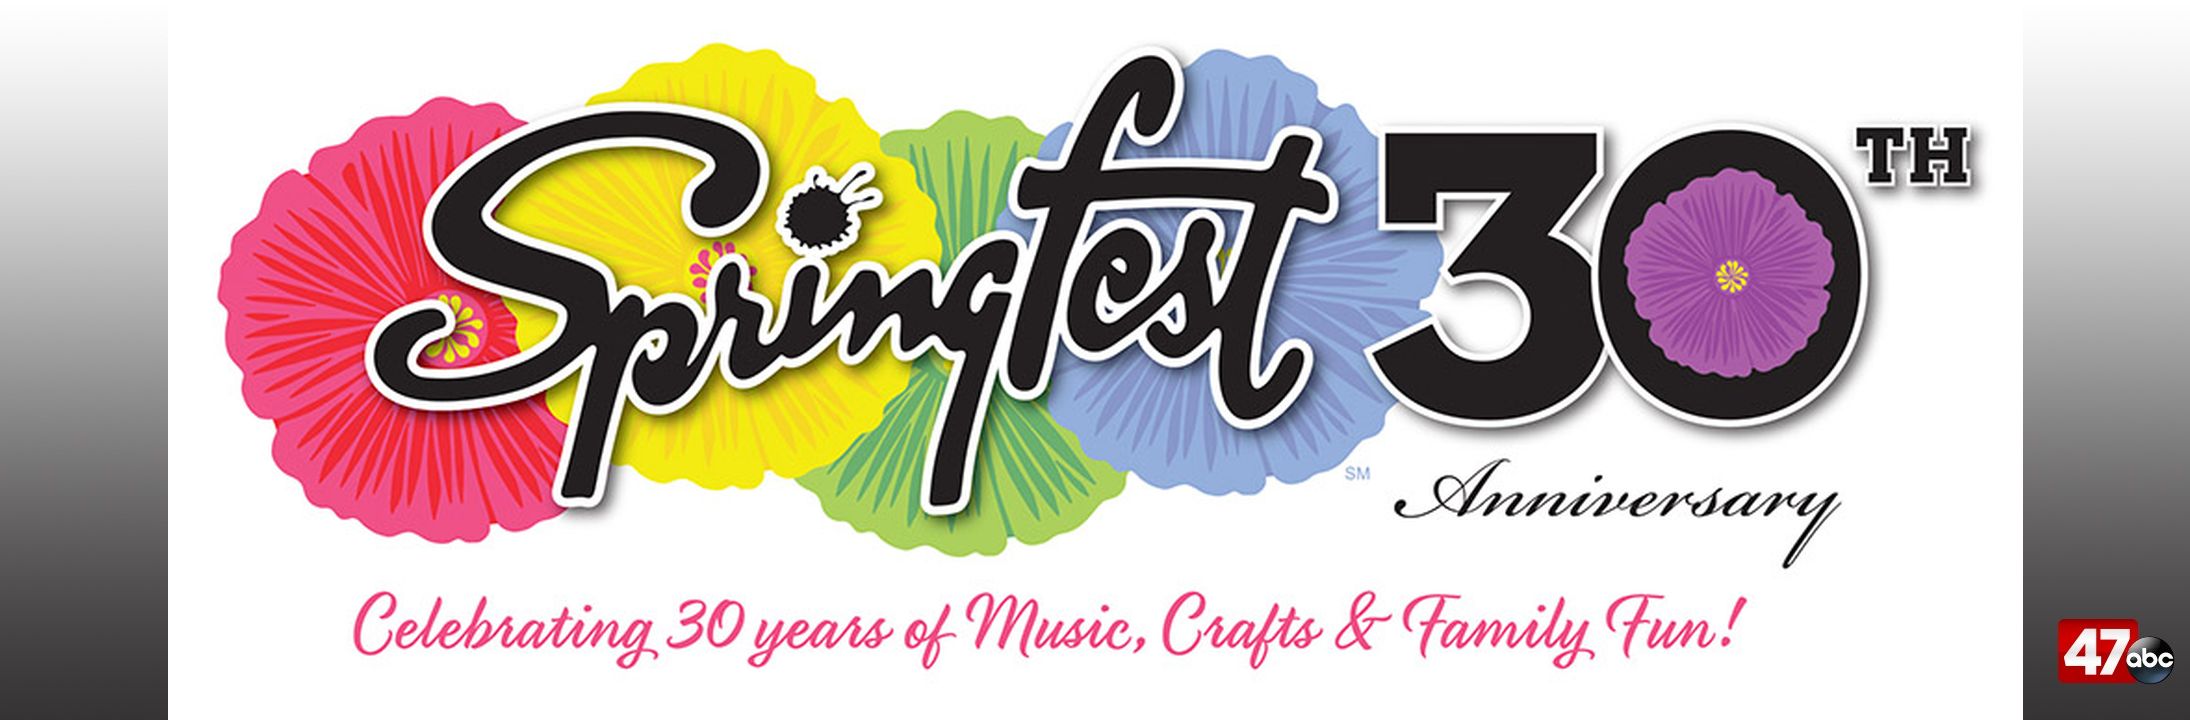 Springfest returns to Ocean City for 30th year 47abc